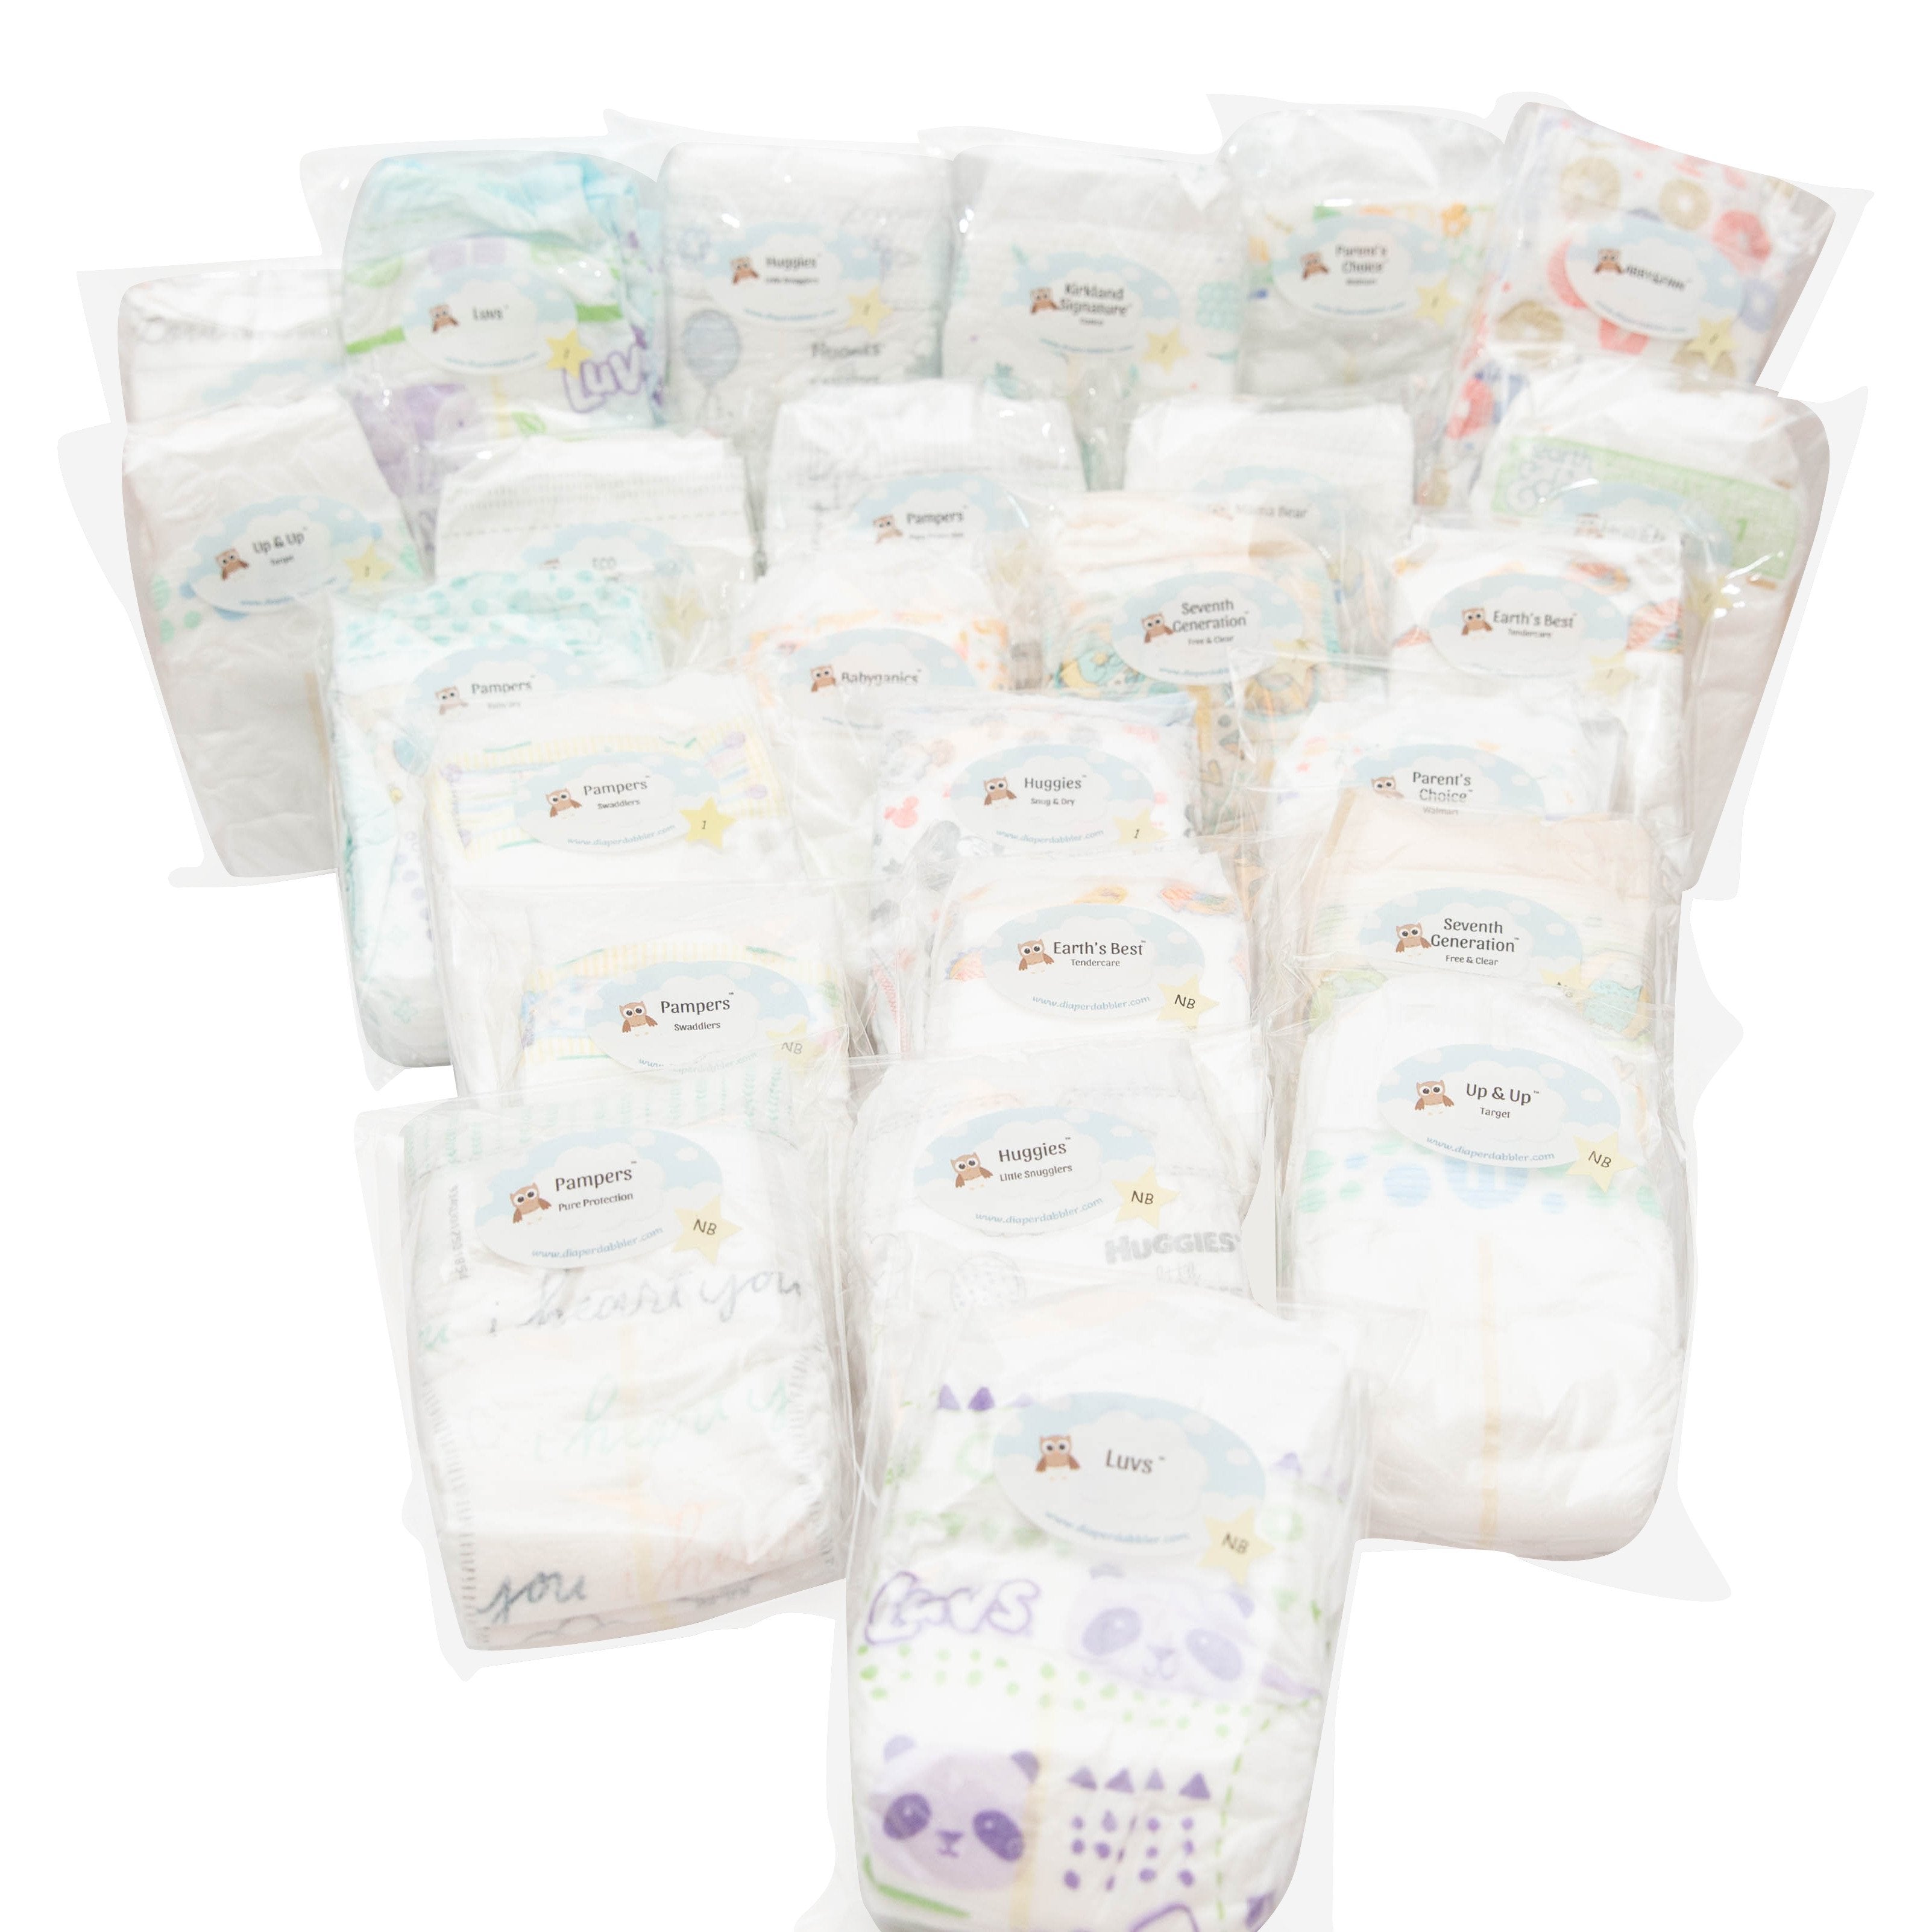 Parent's Choice Dry & Gentle Diapers - 7 Each